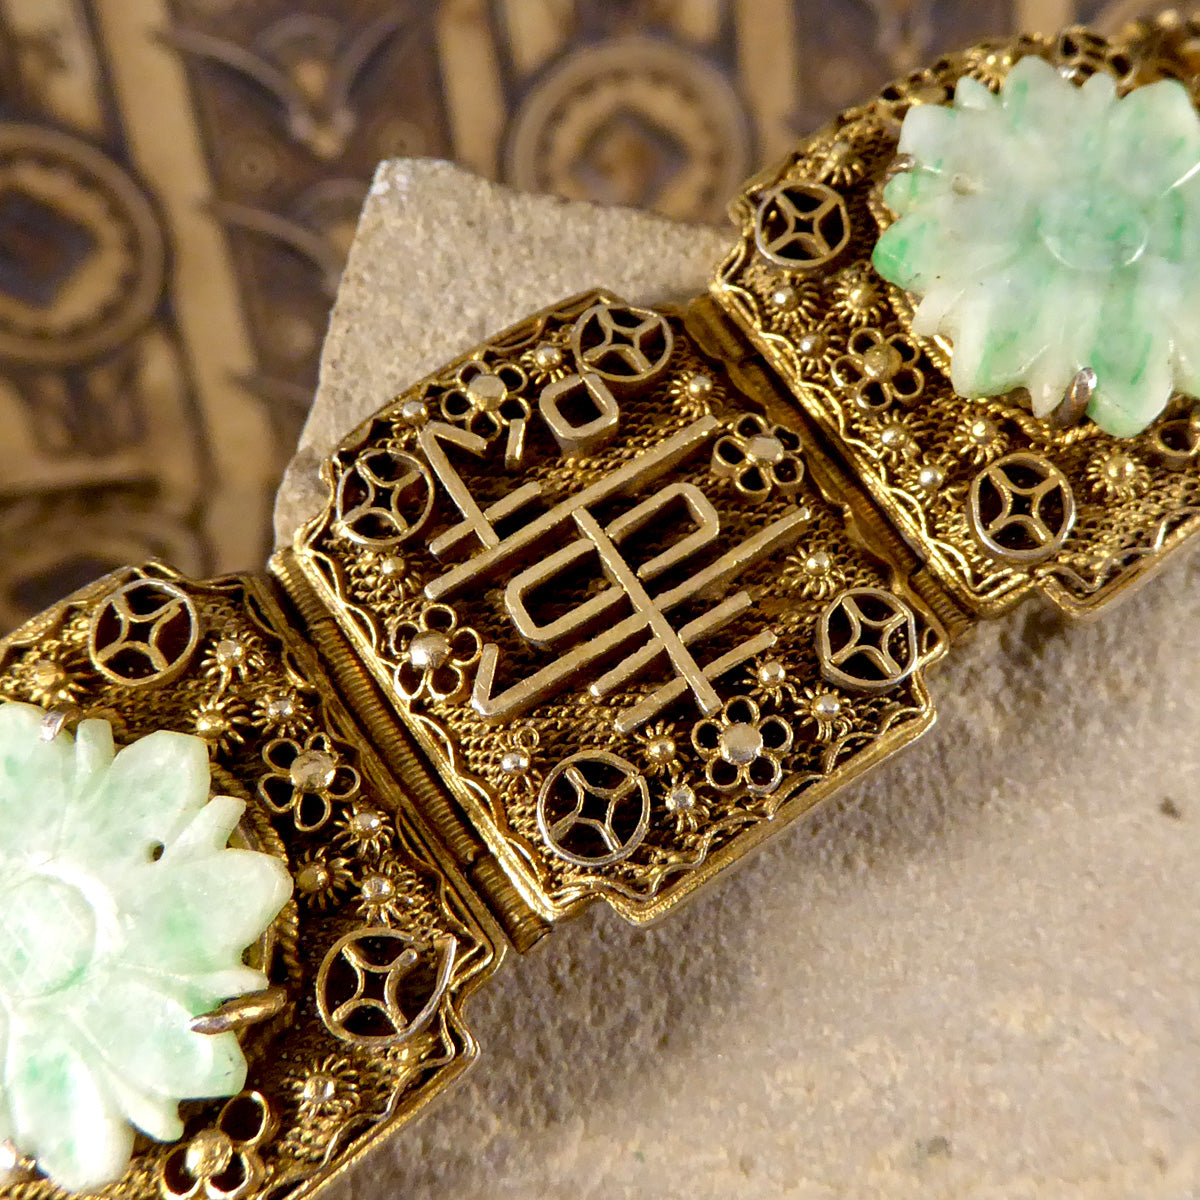 Vintage Jade Carved Flowered Wide Panel Bracelet with Chinese Proverbs in Gold Plated Chinese Silver